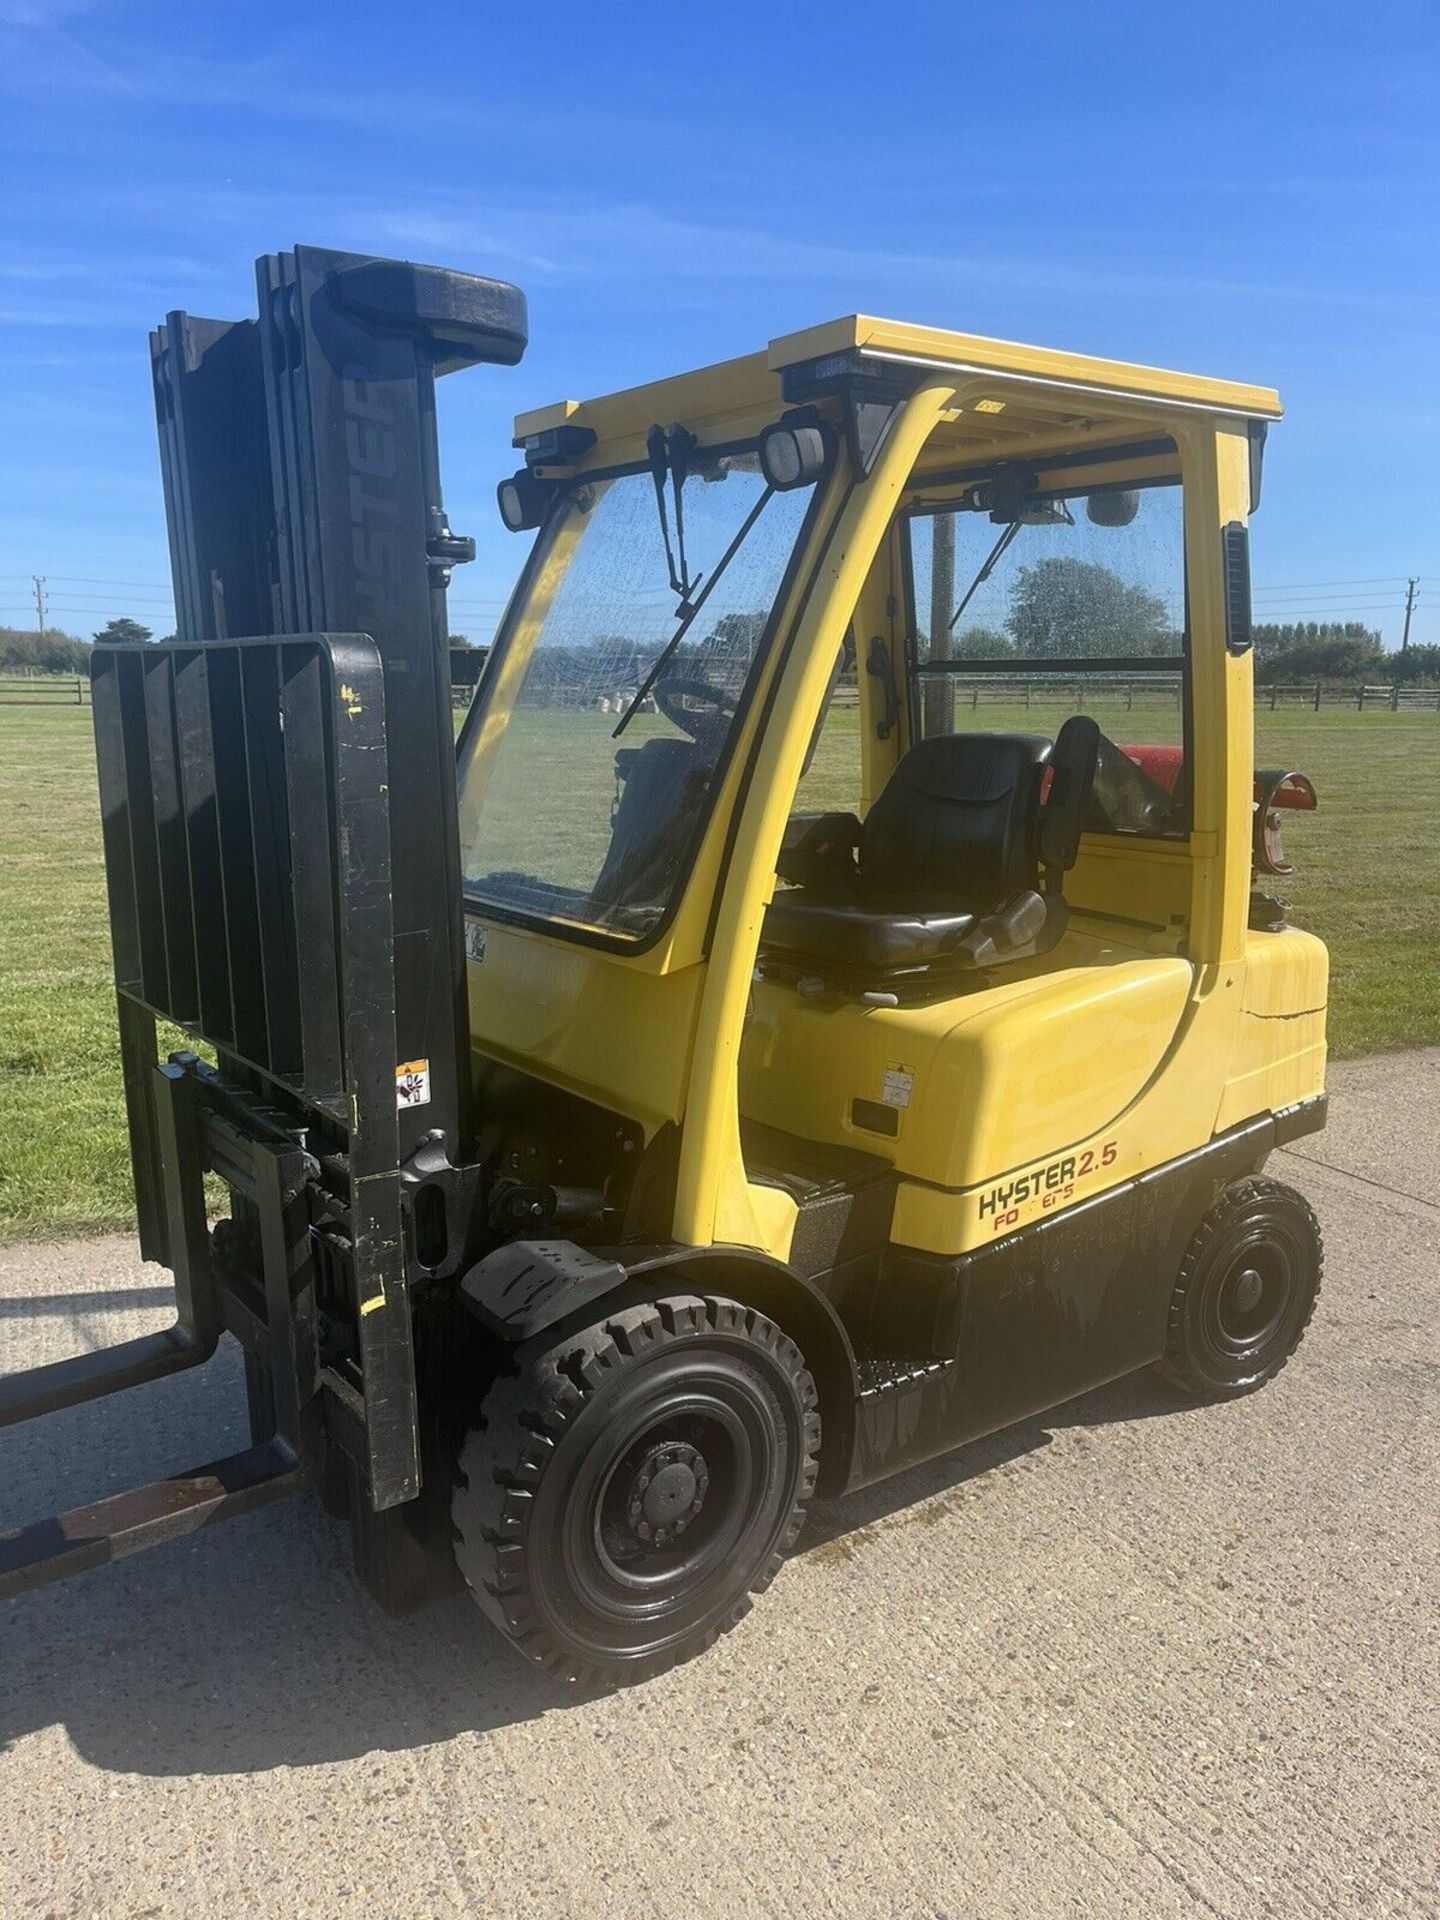 HYSTER / YALE, 2.5 Tonne Gas Forklift (Container Spec)